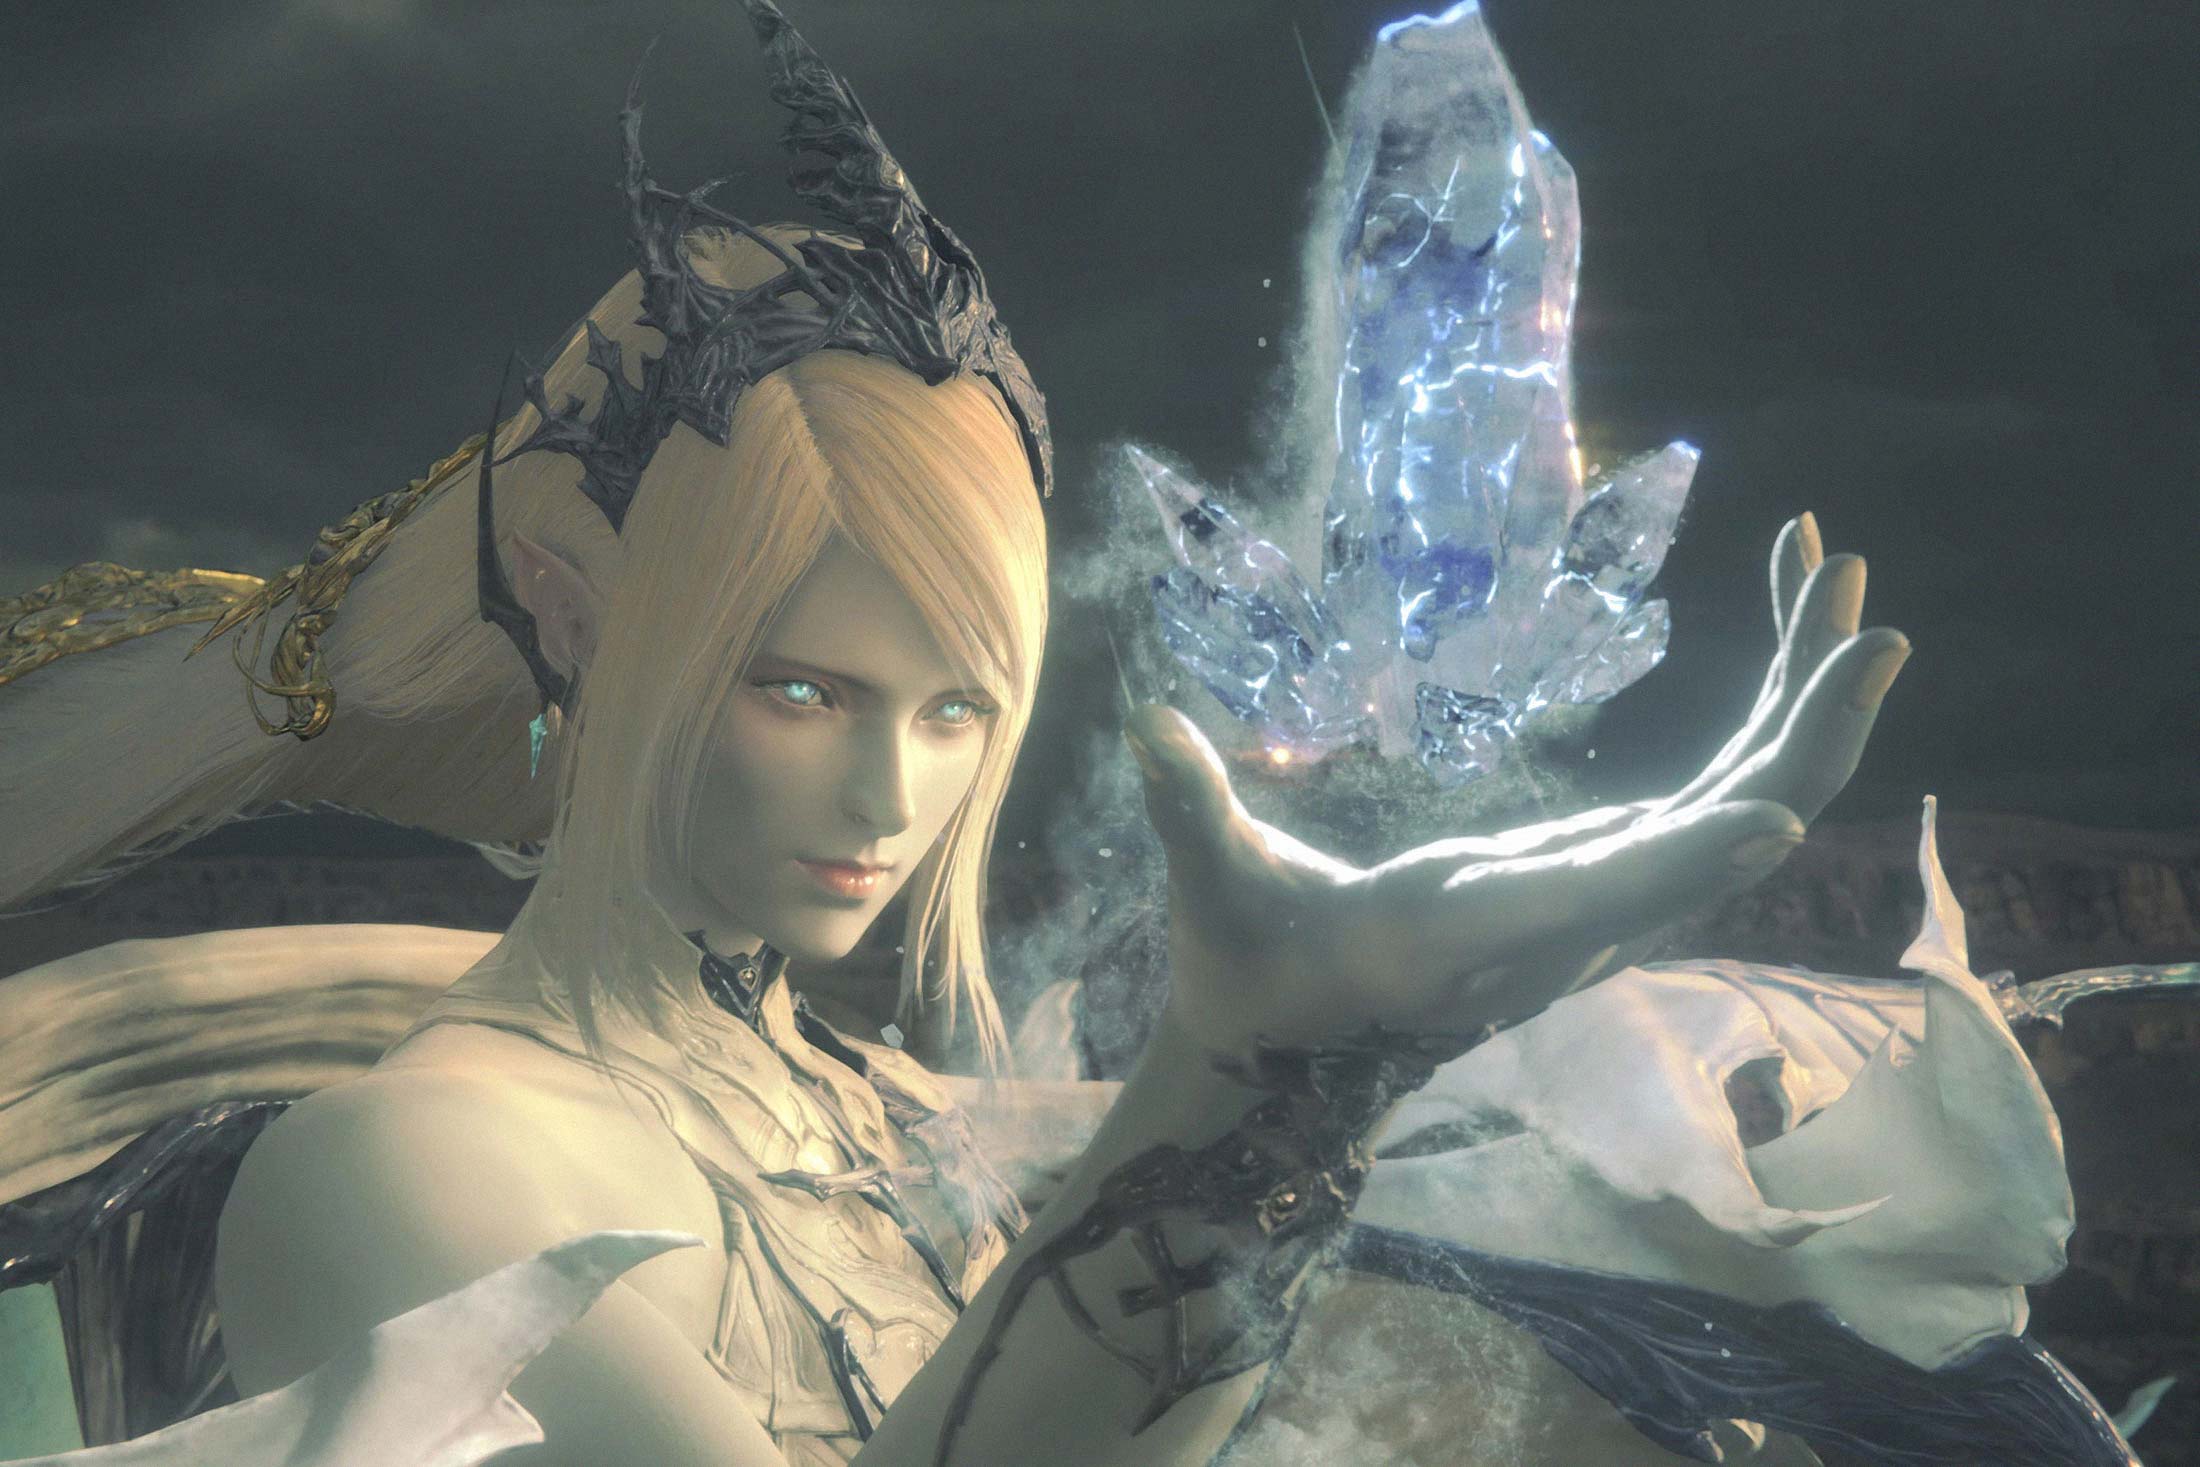 Review: 'Final Fantasy XVI' goes full 'Game of Thrones' - Los Angeles Times